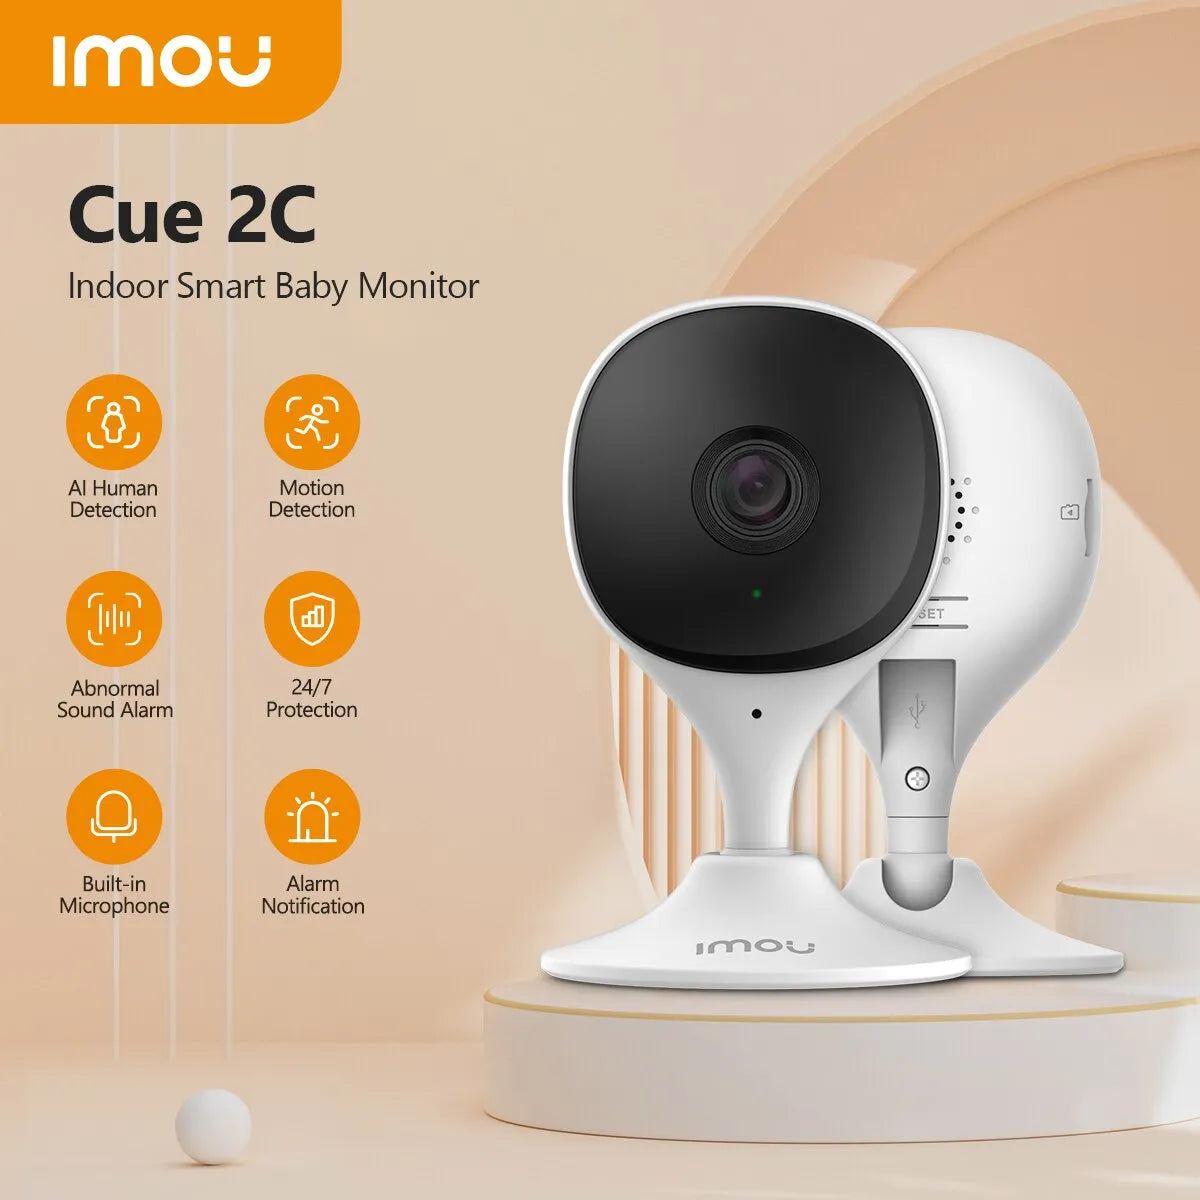 IMOU Cue Security Camera: Smart Baby Monitor with Color Night Vision & AI Detection  ourlum.com Add 32GB SD Card English rules 3.6mm